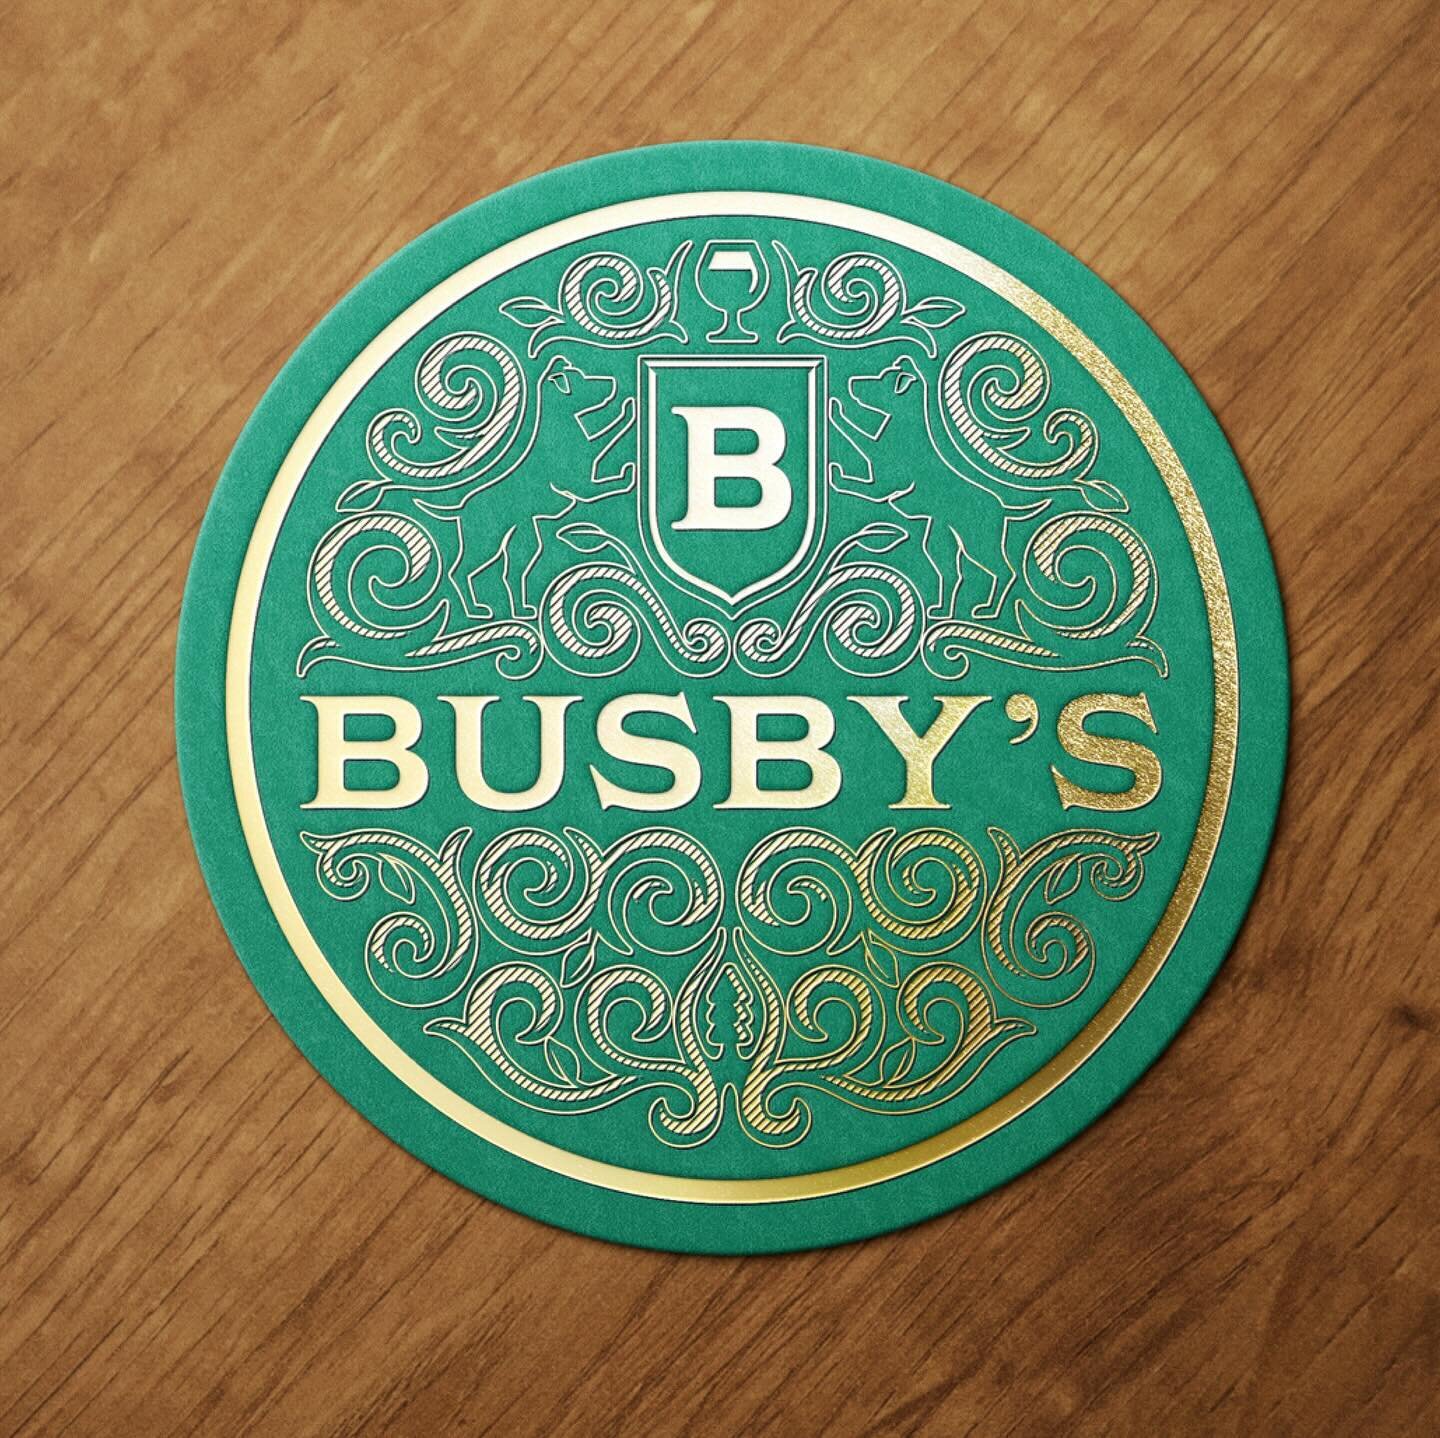 New work for a hospitality craft bar down in Bay View! 

Inspired by their dog Busby and the rich history of the building. From being a stage coach station, a prohibition speak easy to present-day a bar that embraces innovation and creativity in cock